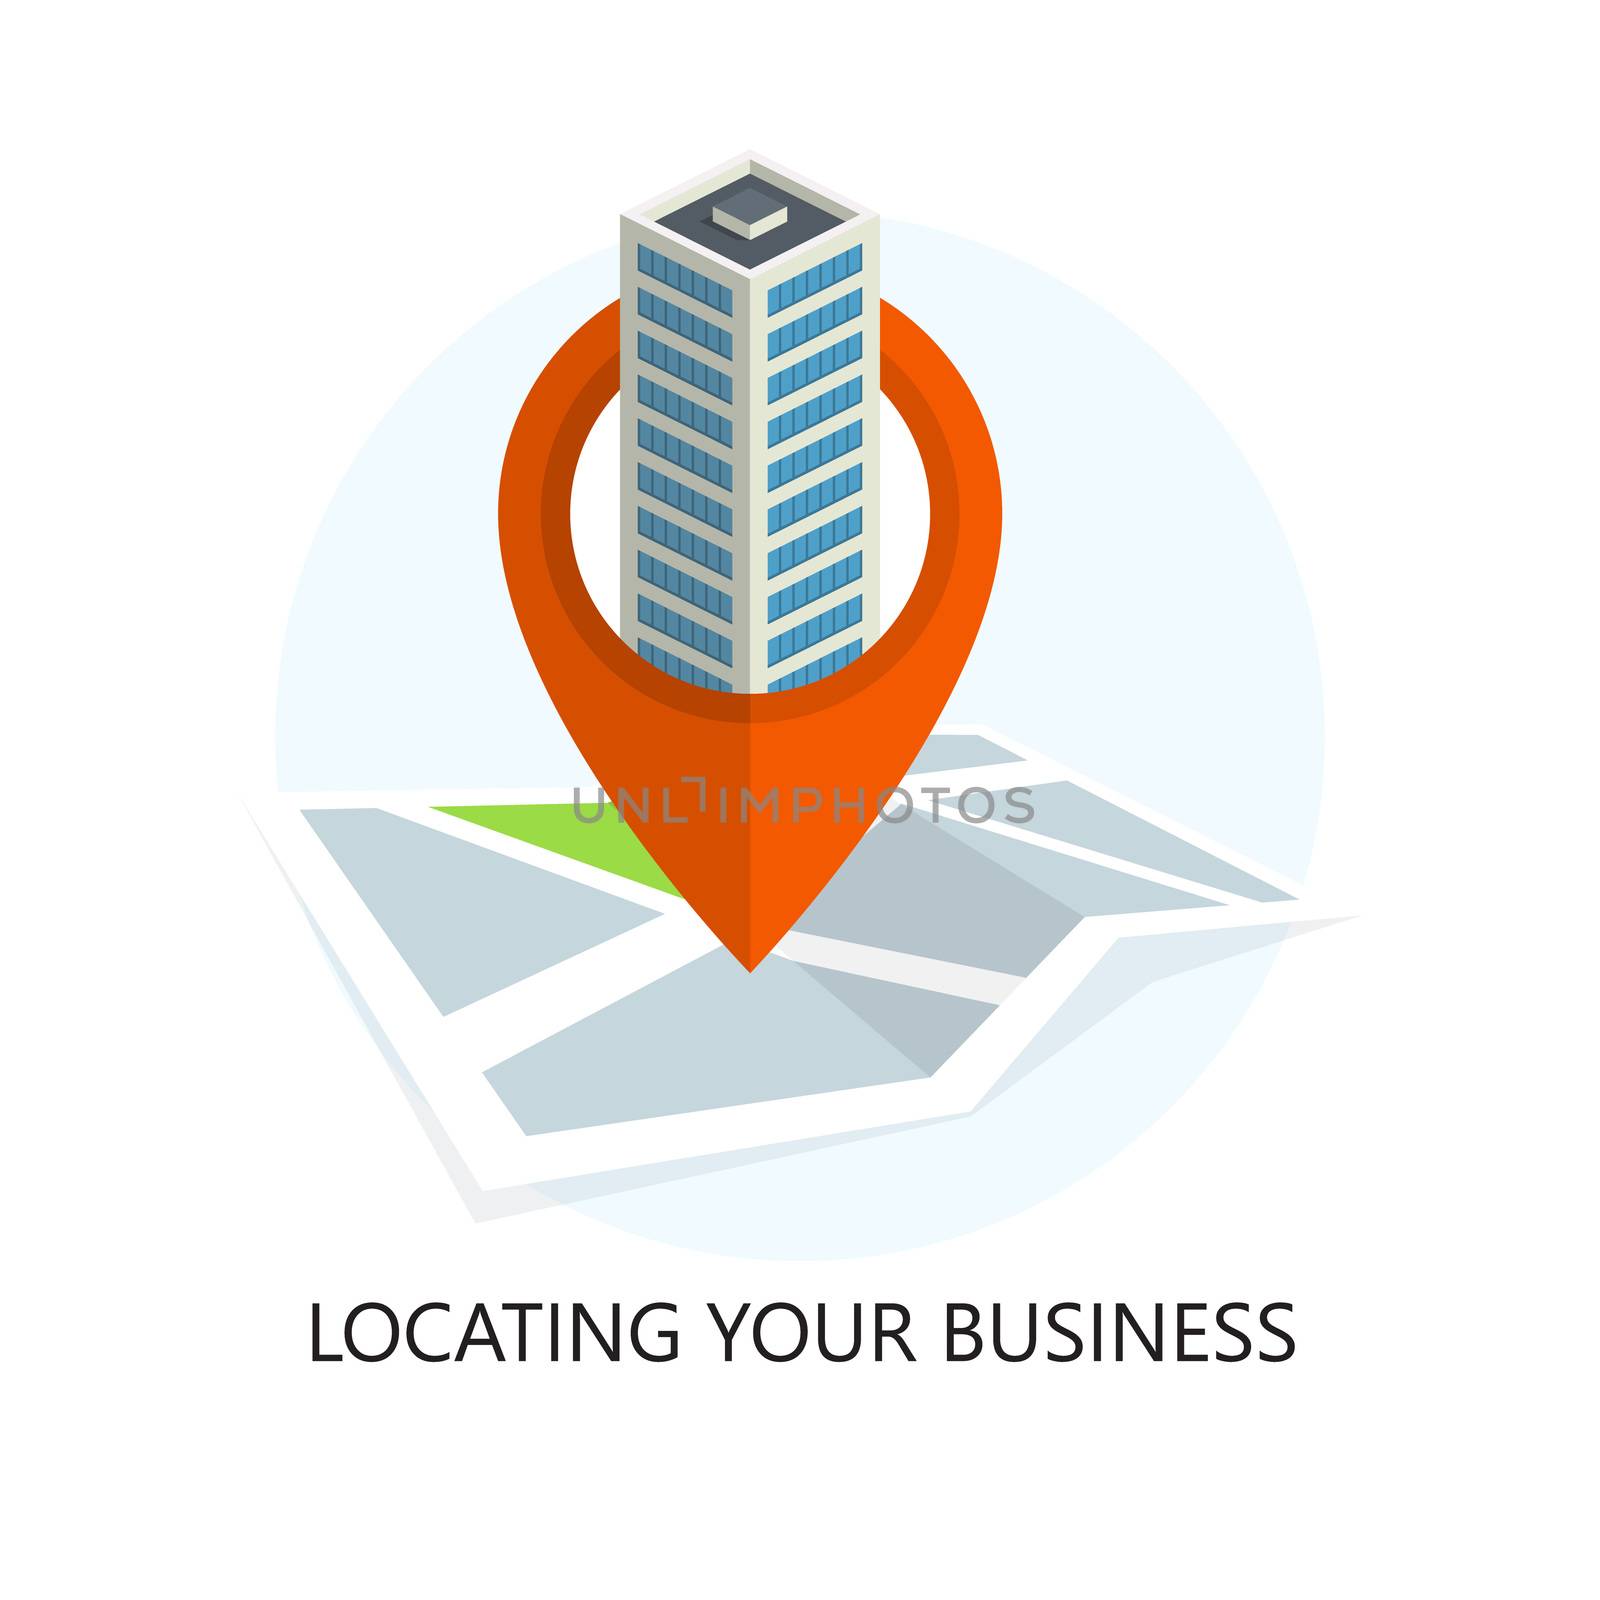 Location Icon. Locating Your Business. Flat Design. by WaD